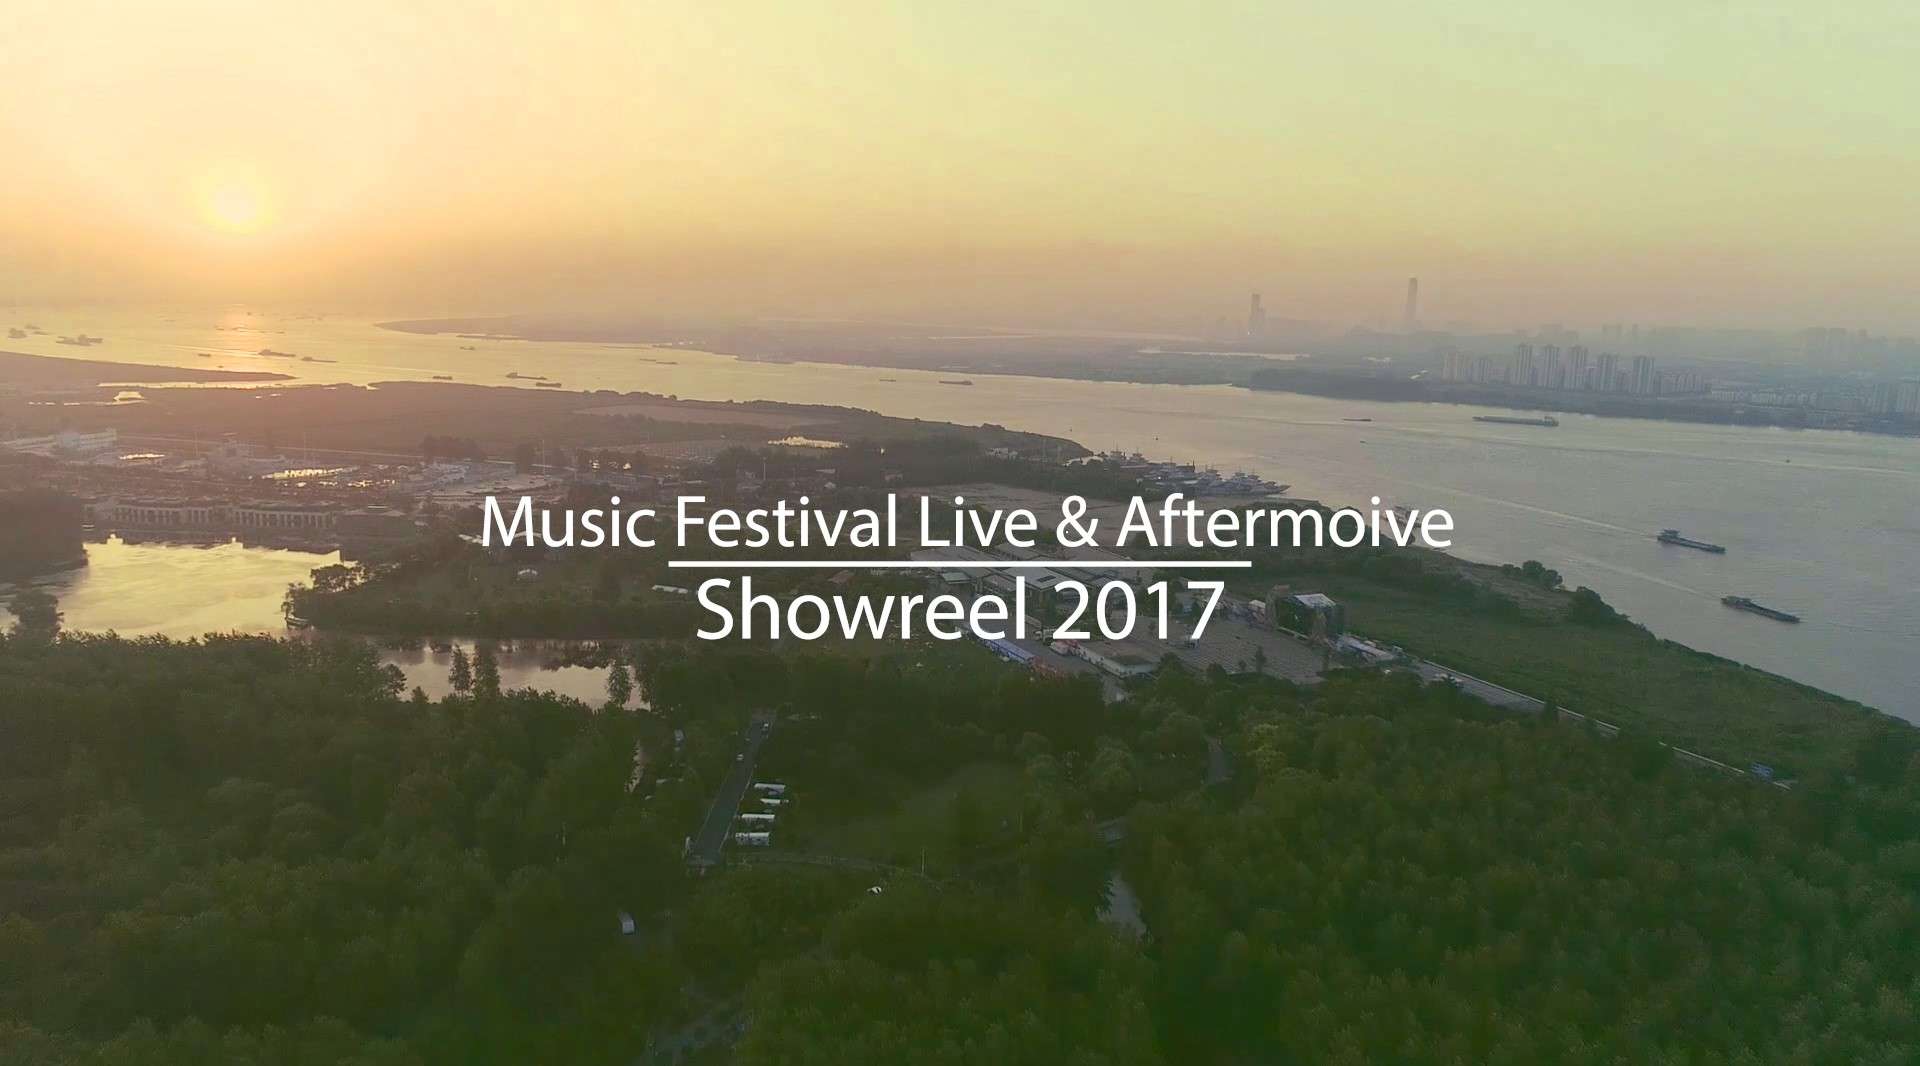 Music Festival Live & Aftermoive Showreel 2017